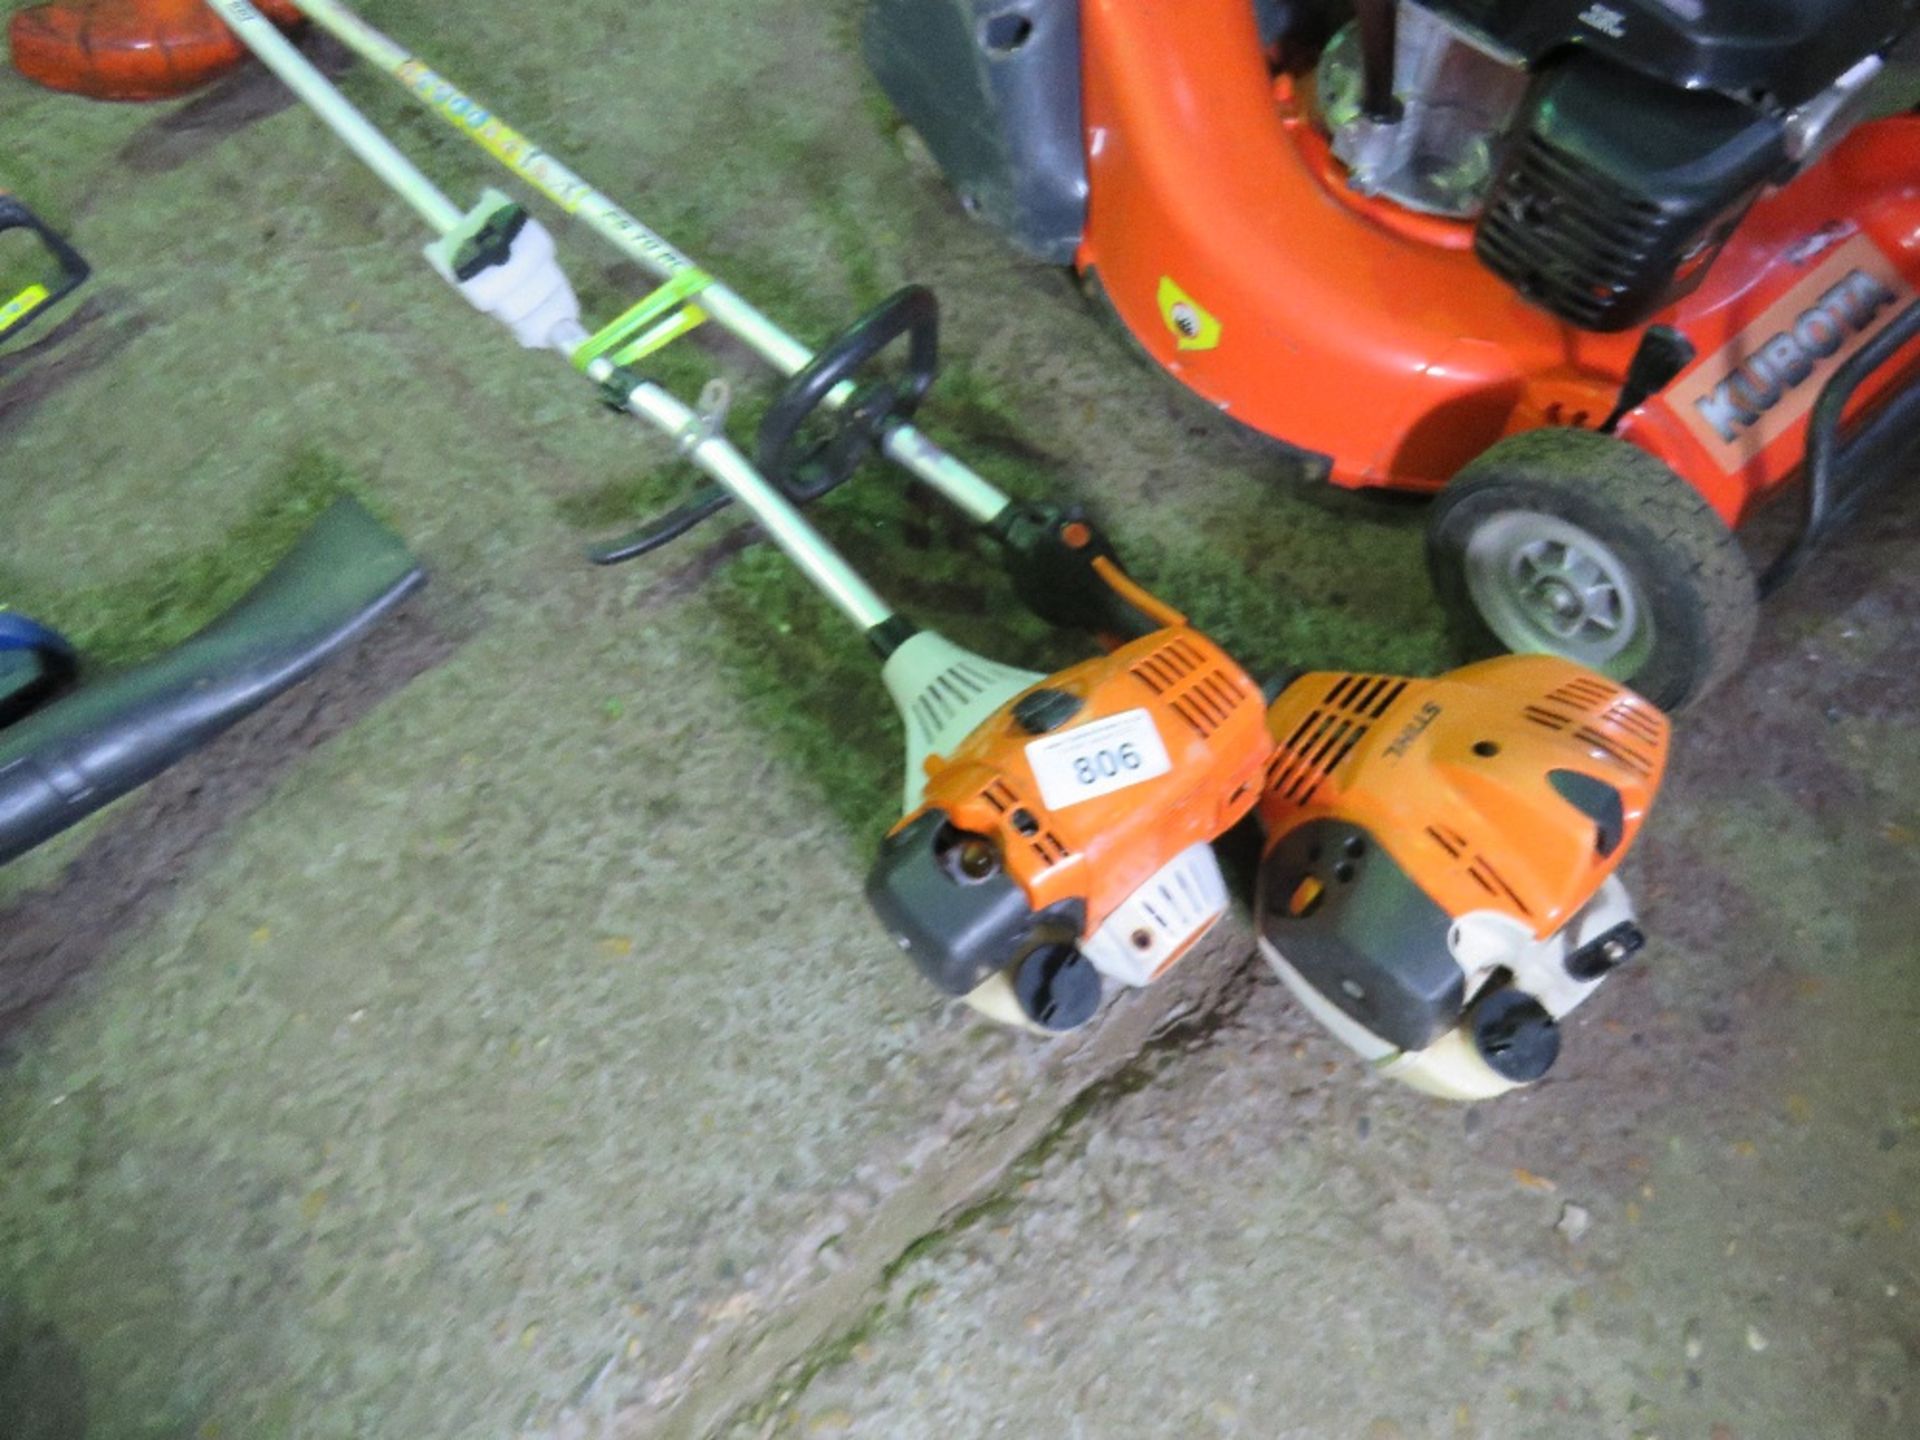 2 X STIHL PETROL ENGINED STRIMMERS: ONE HAS A BENT/DAMAGED SHAFT. THIS LOT IS SOLD UNDER THE AUCTION